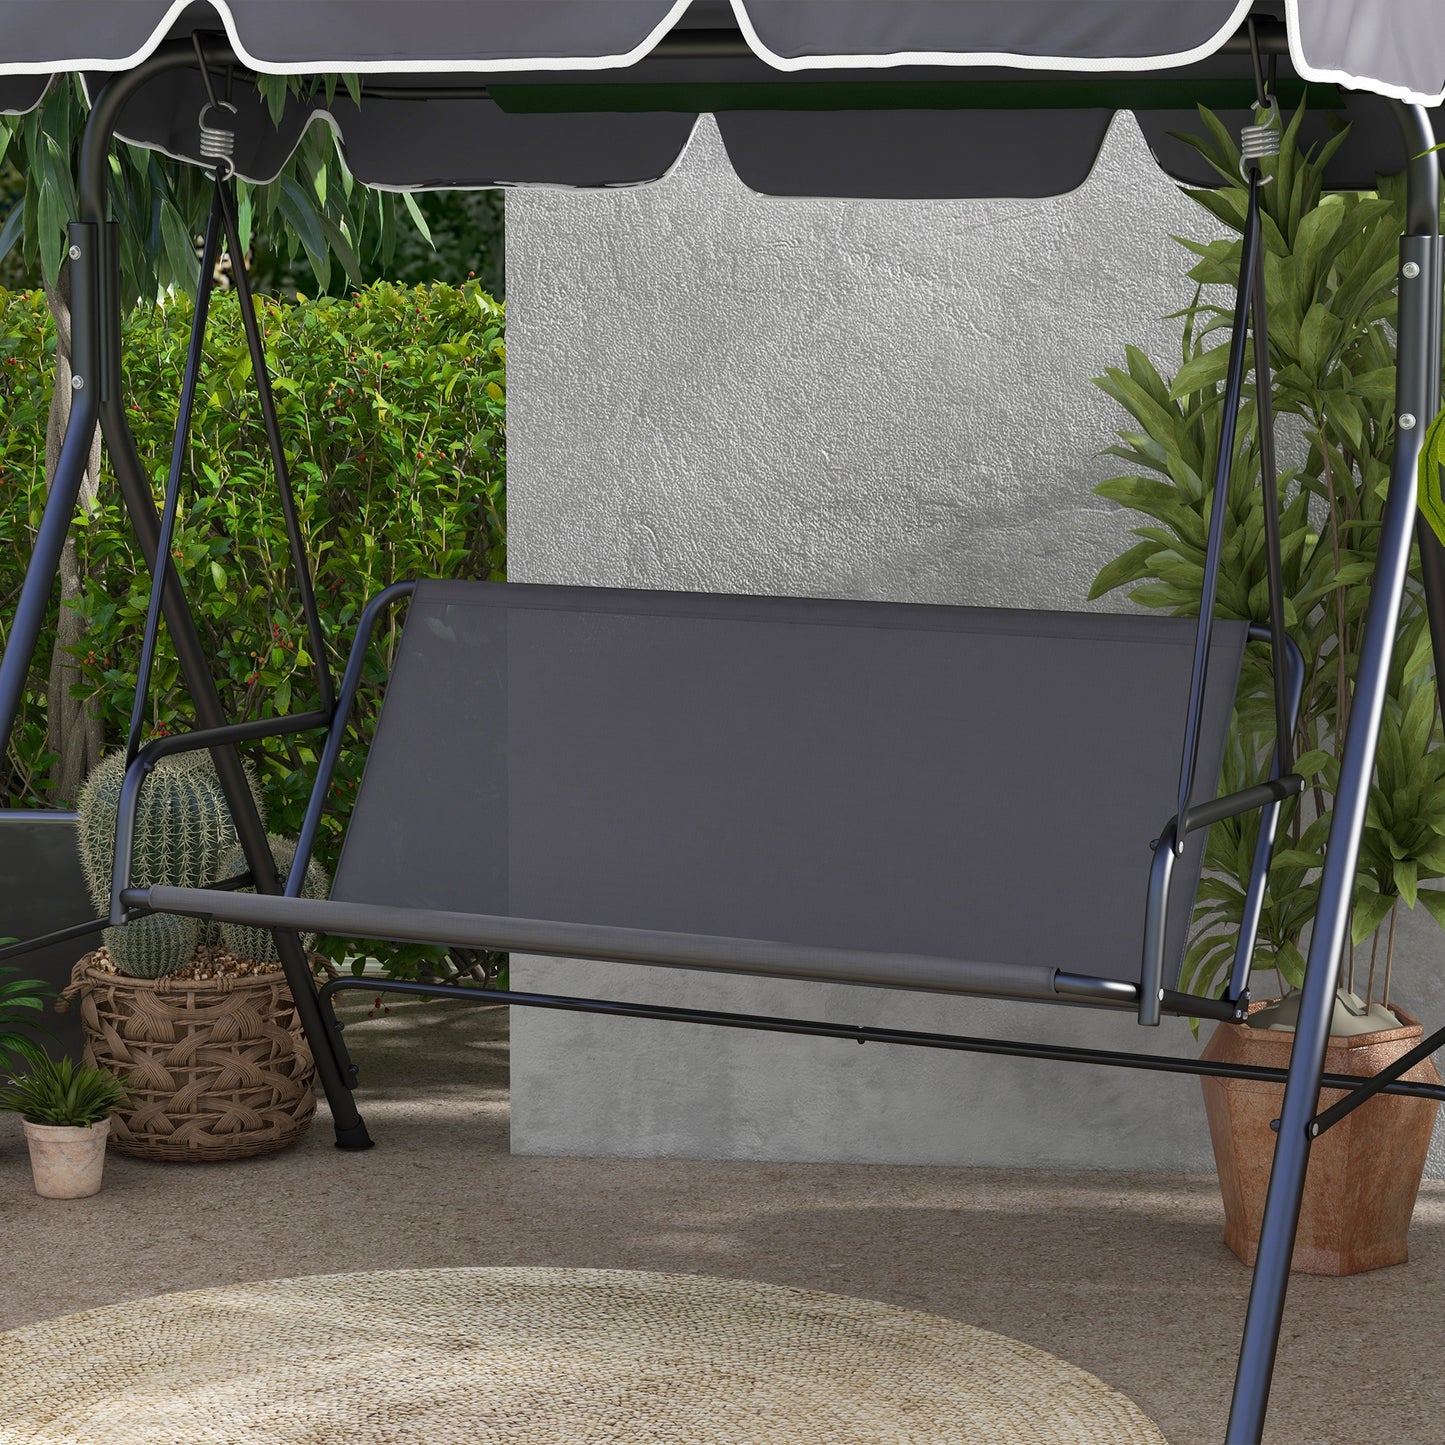 Outsunny Garden Swing Seat Cover Replacement, for 2 and 3 Seater Swing Bench, 115cm x 48cm x 48cm, Gark Grey